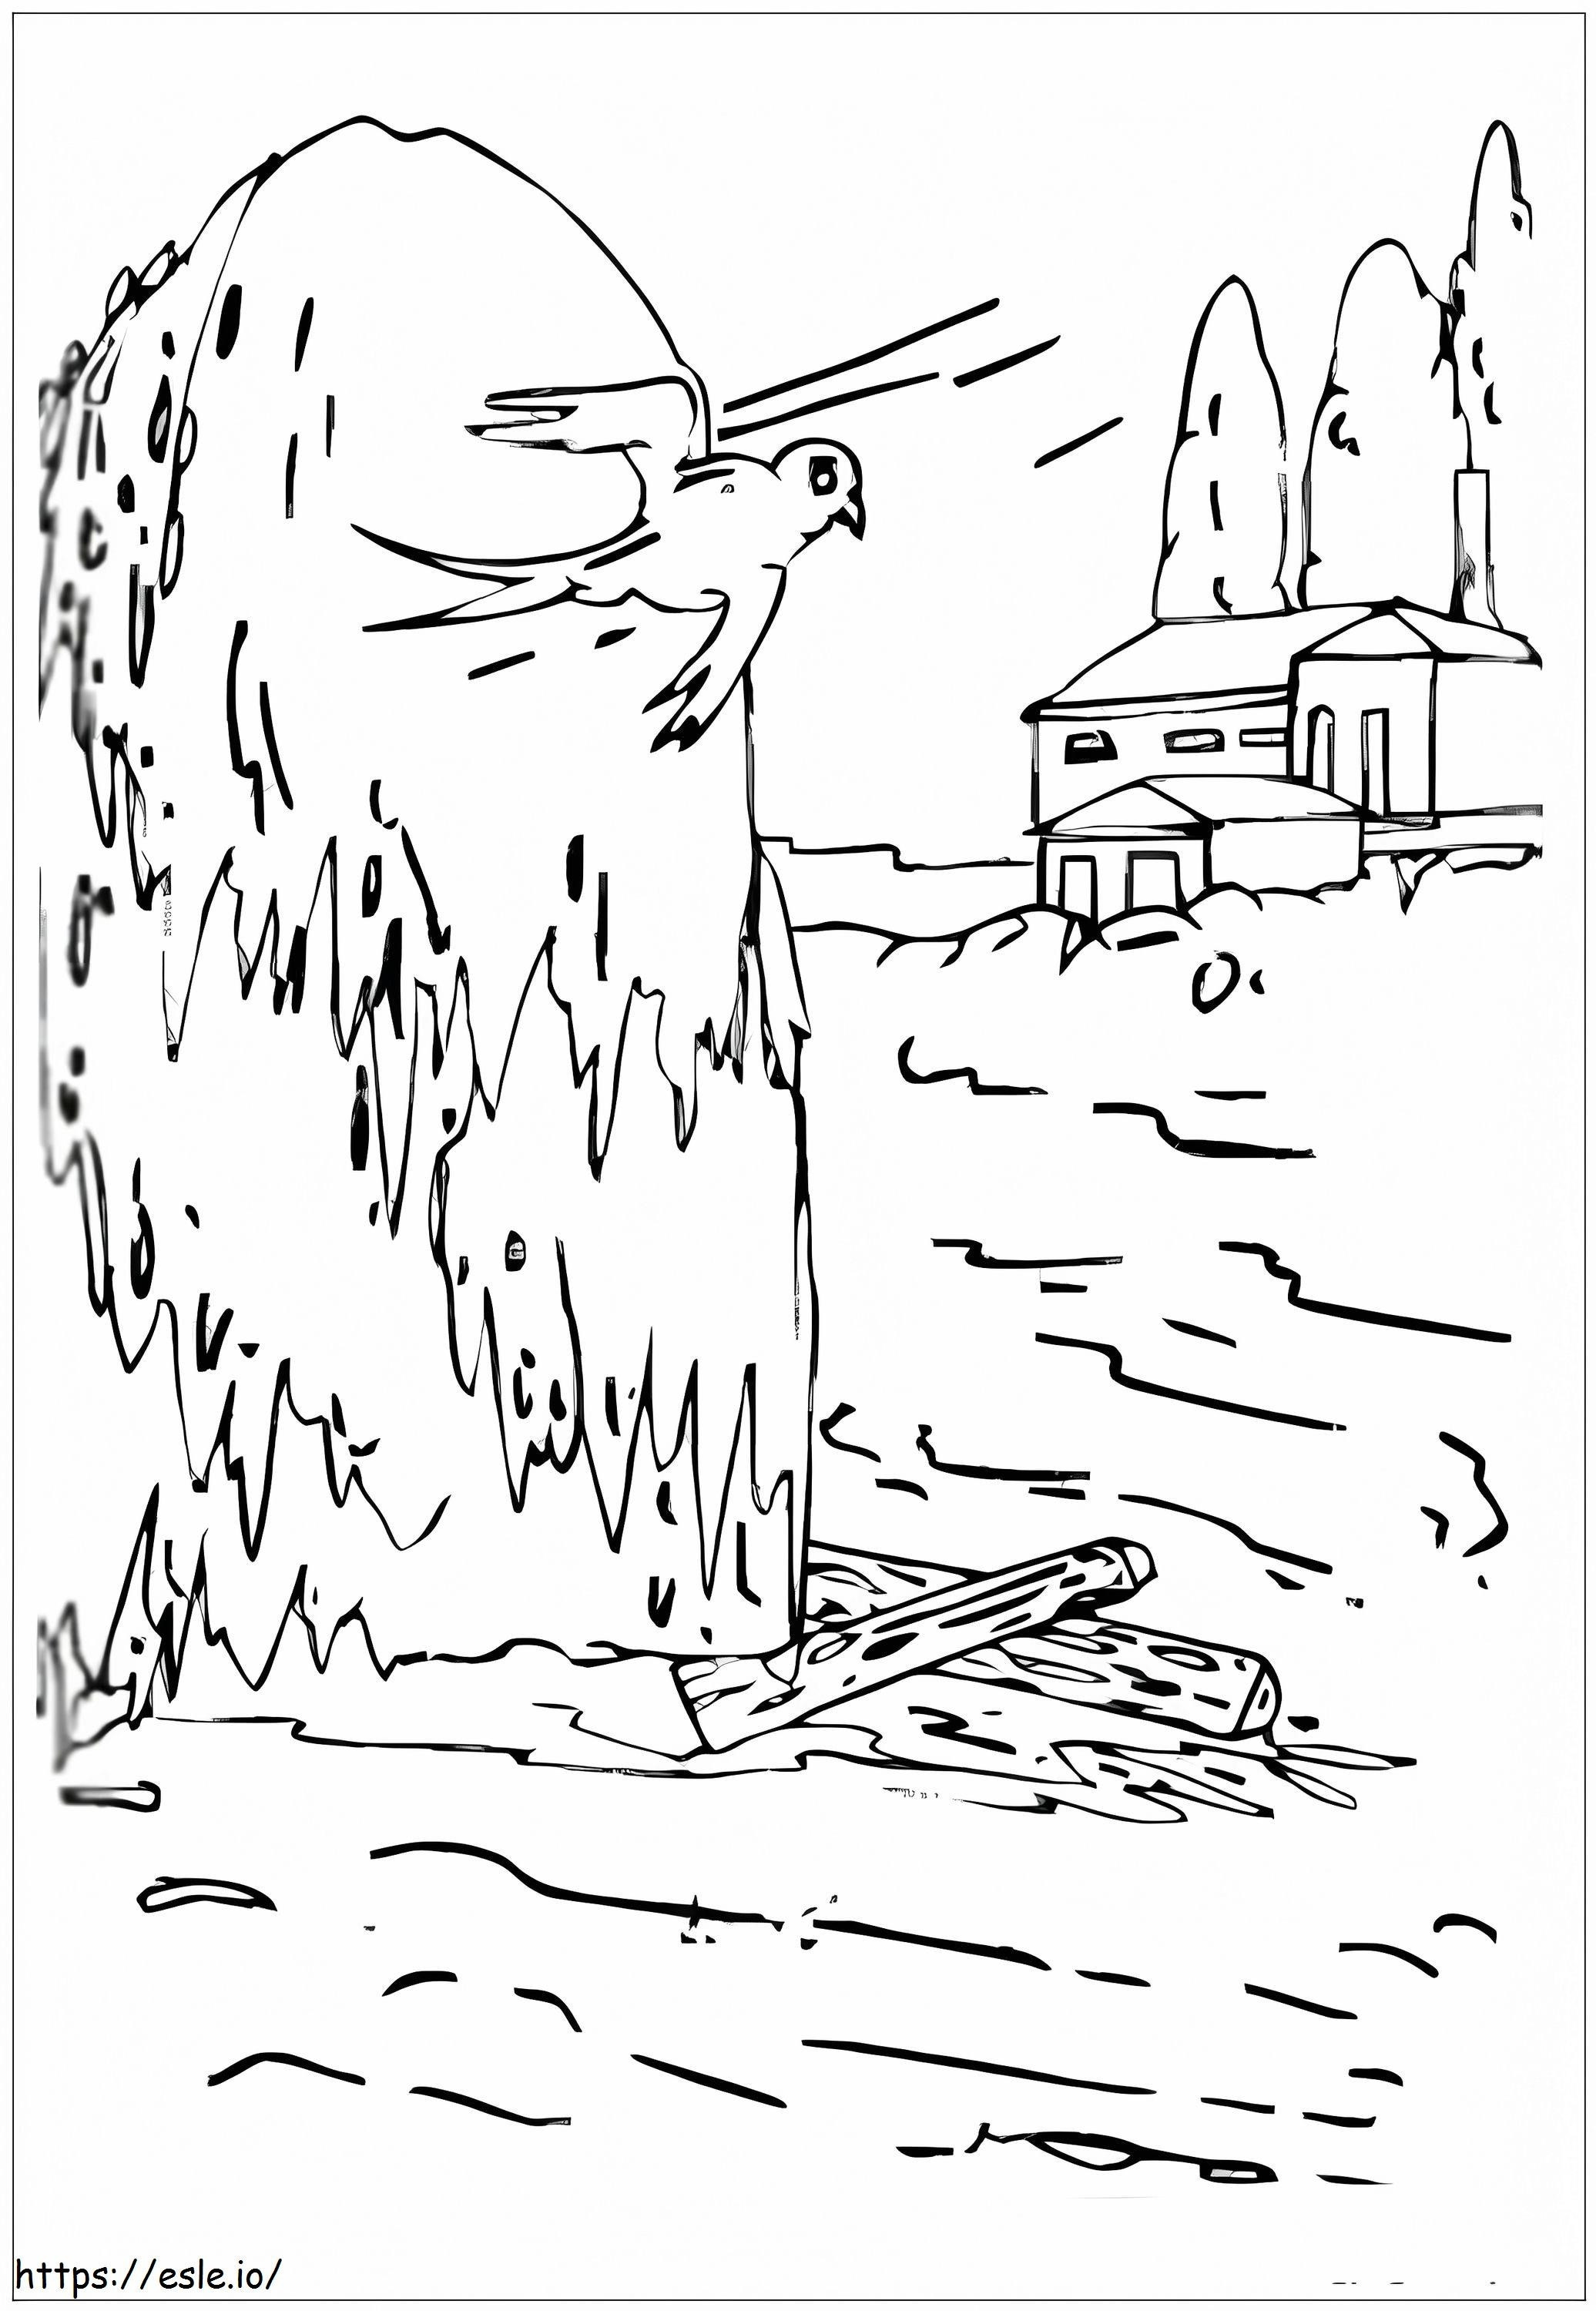 A Flood coloring page